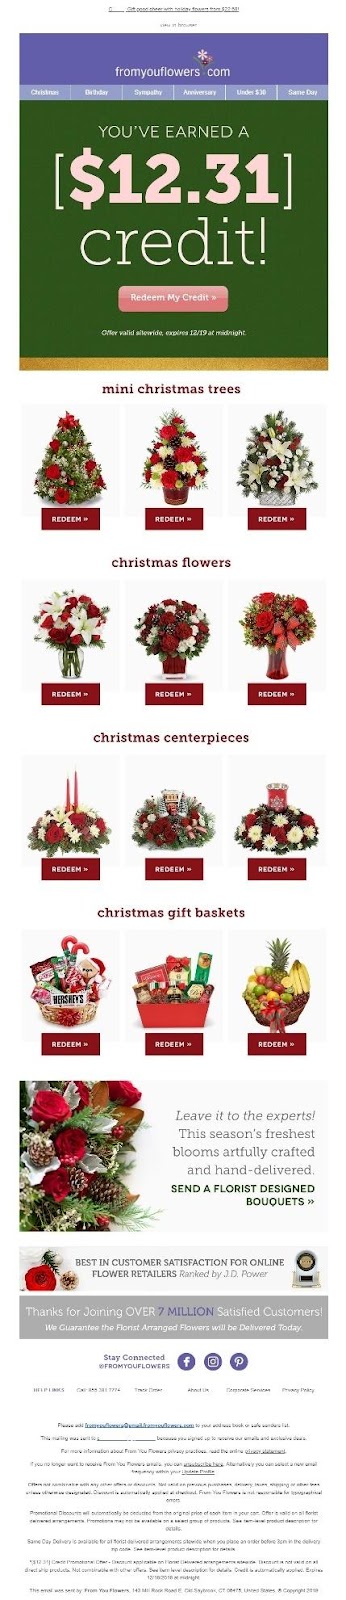 fromyouflowers.com holiday email campaign